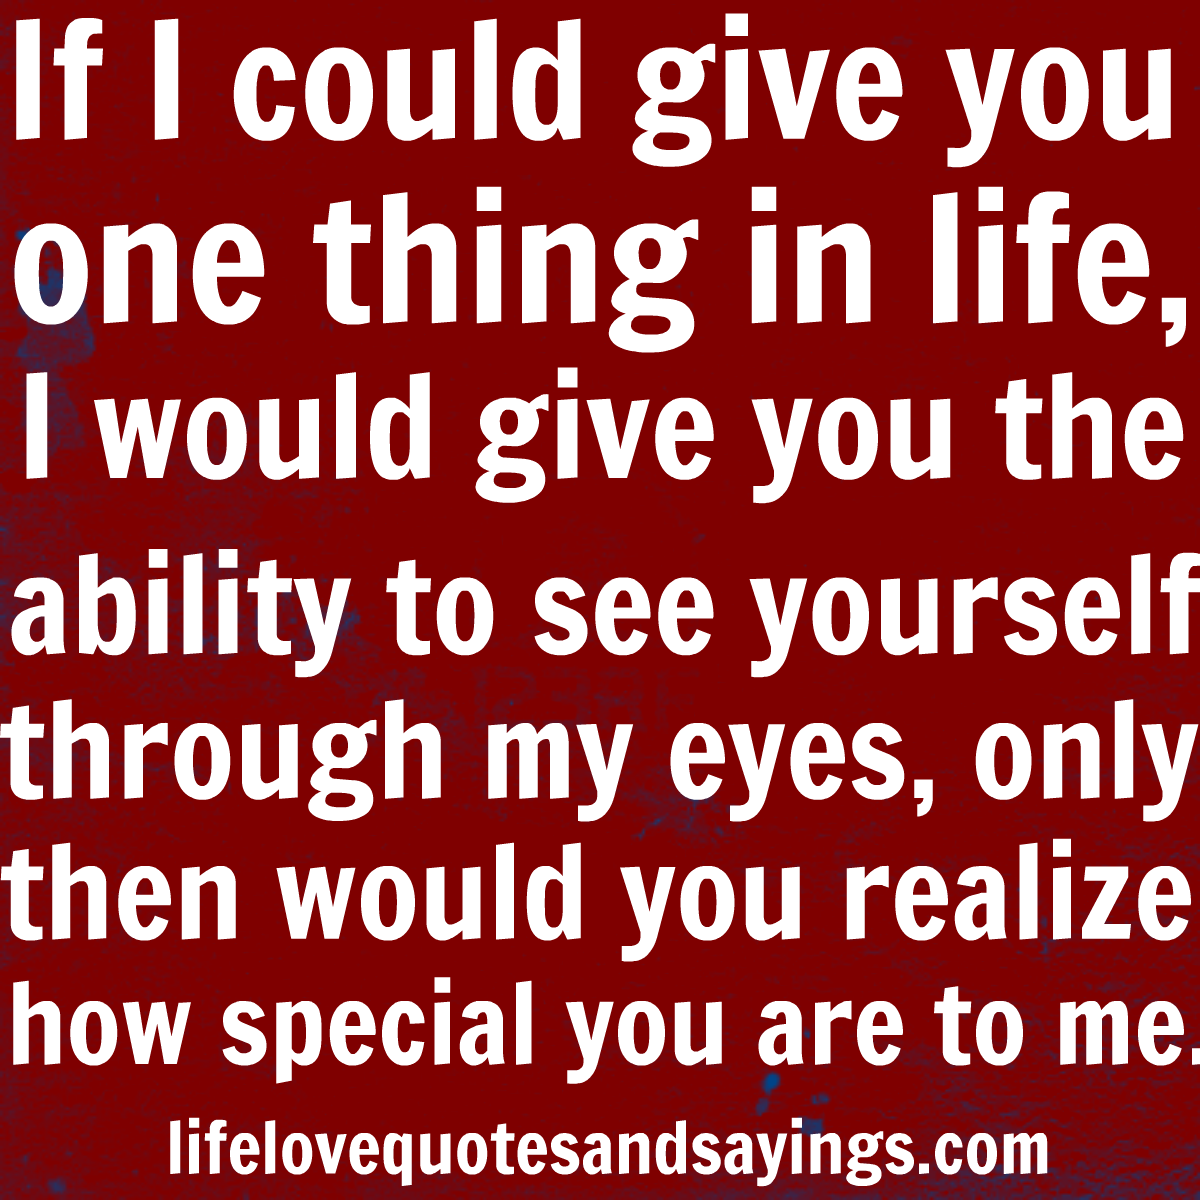 I Only Have Eyes For You Quotes. QuotesGram